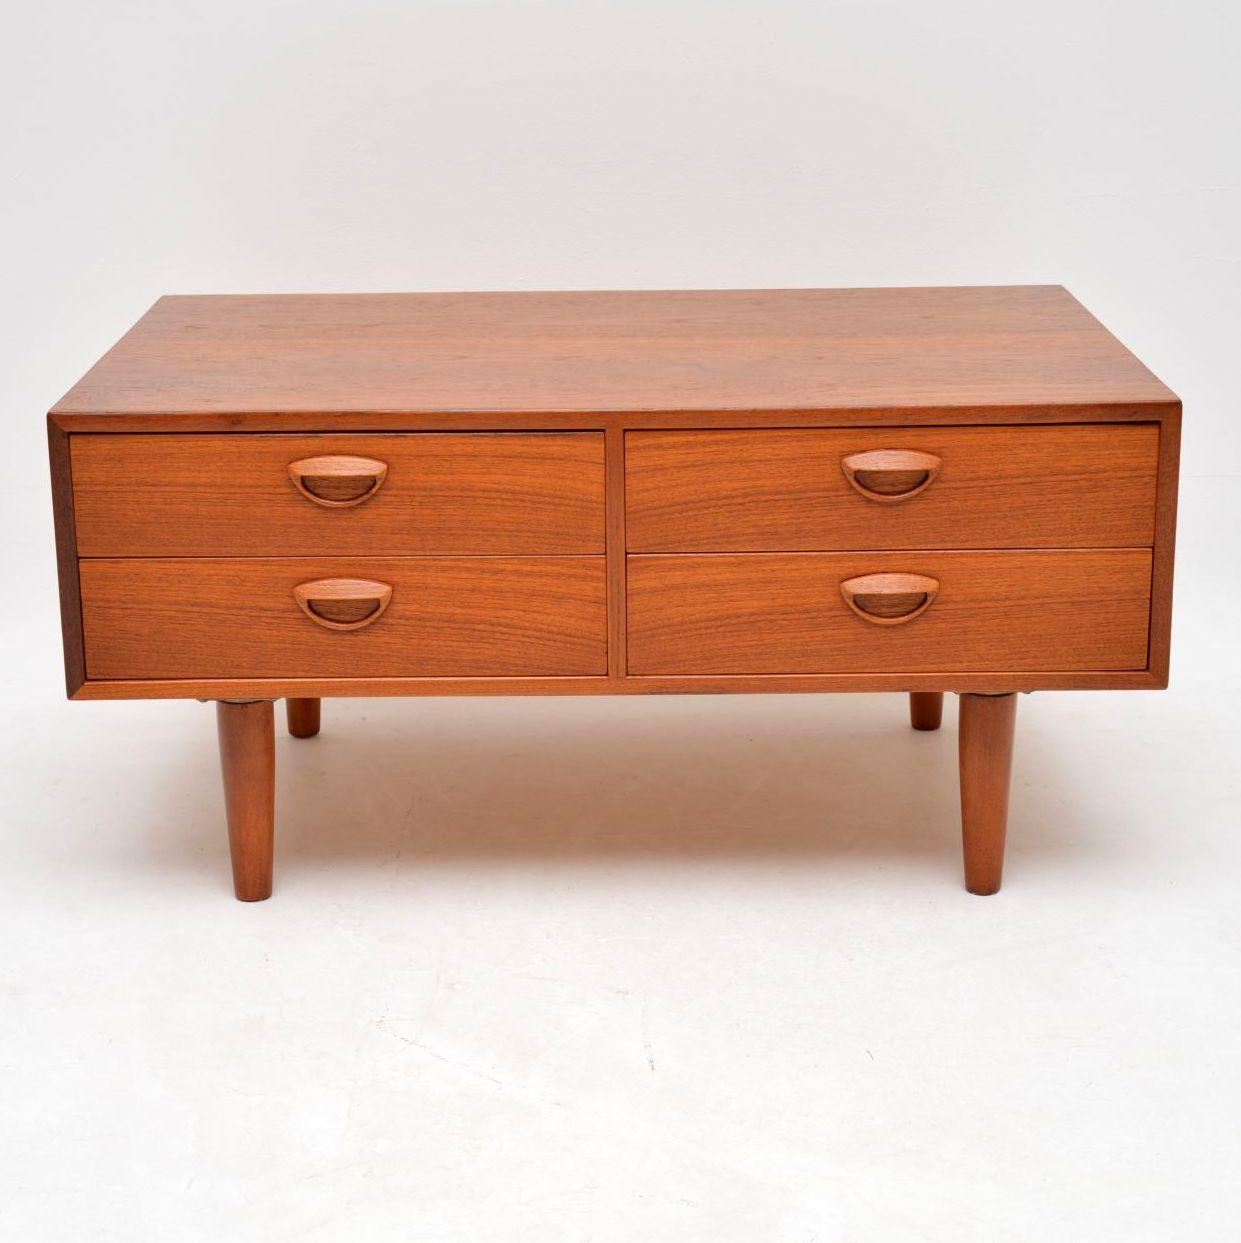 A stylish and practical vintage Danish sideboard or chest of drawers, this was designed by Kai Kristiansen, it dates from the 1960s. It’s a useful size, low and not too wide, but with plenty of storage space inside the four drawers as it is quite